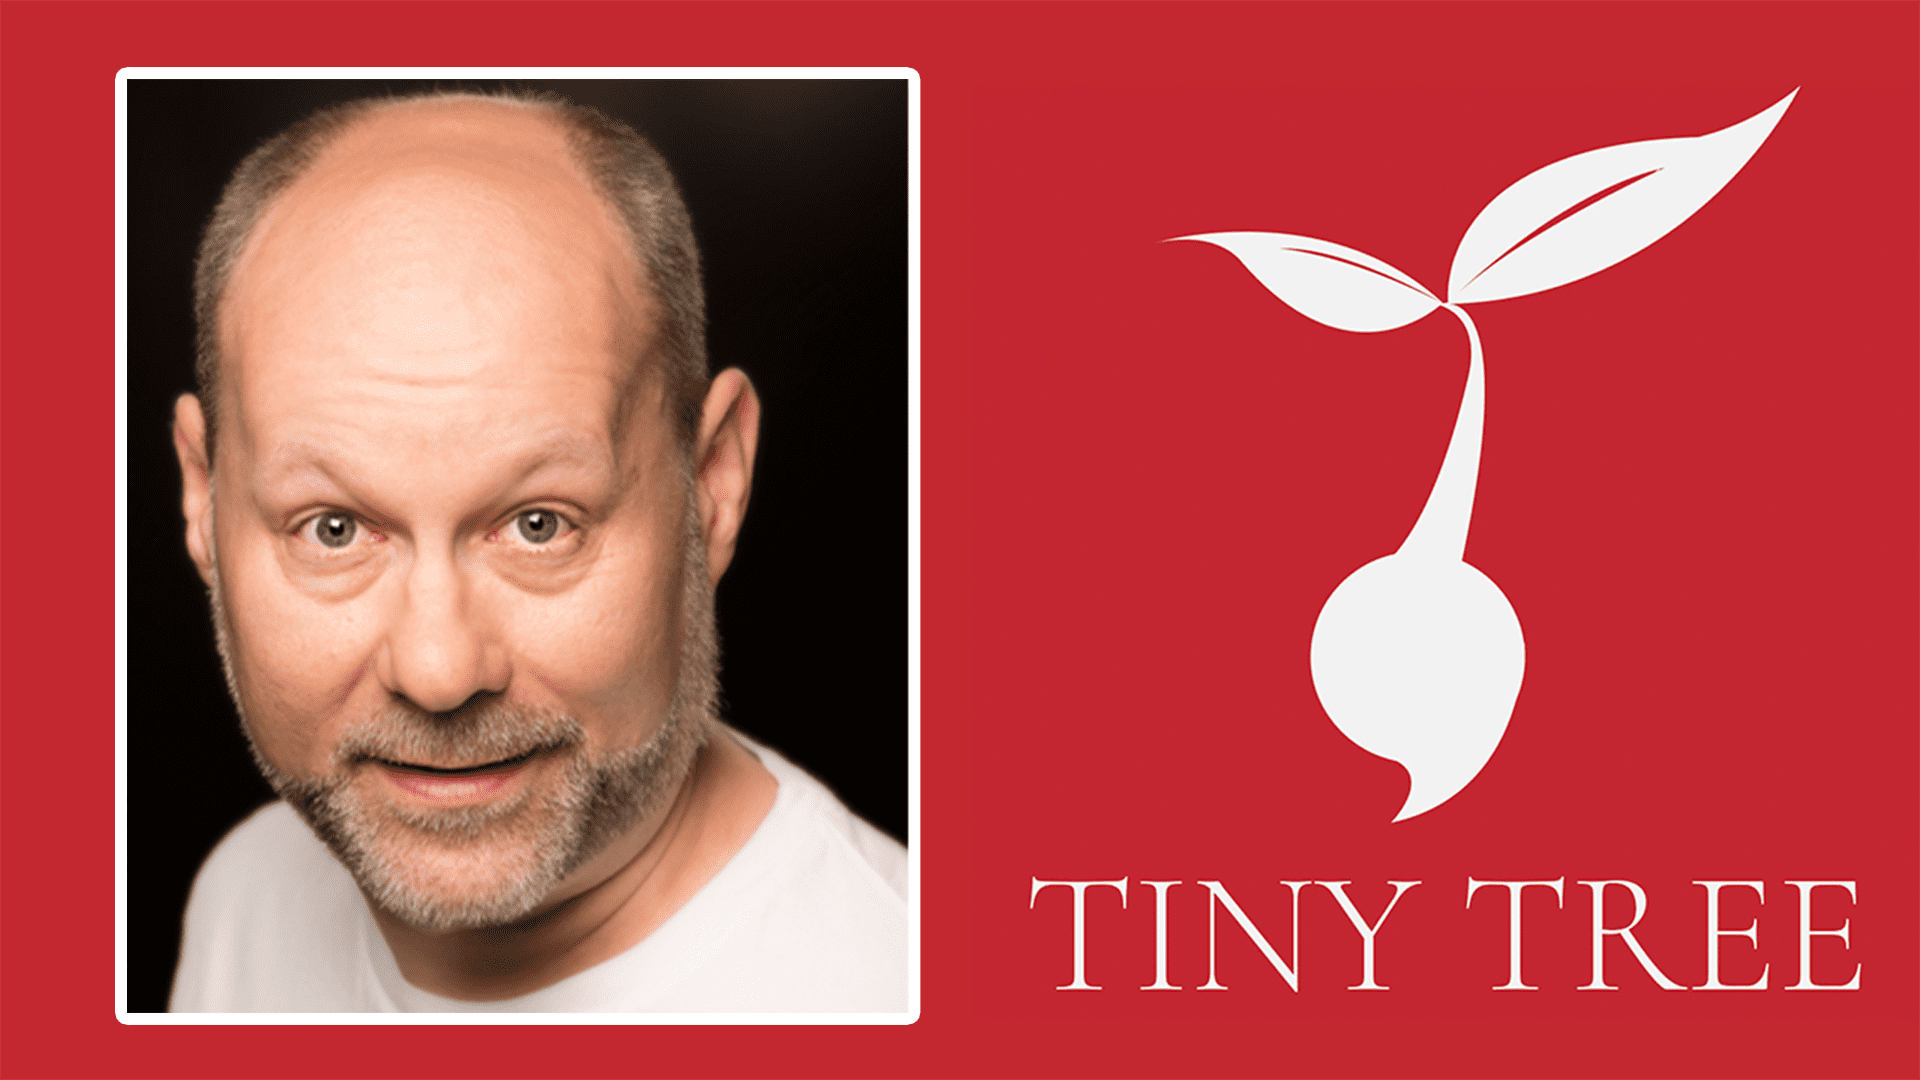 Author Ian billings with the Tiny Tree logo on a red background.